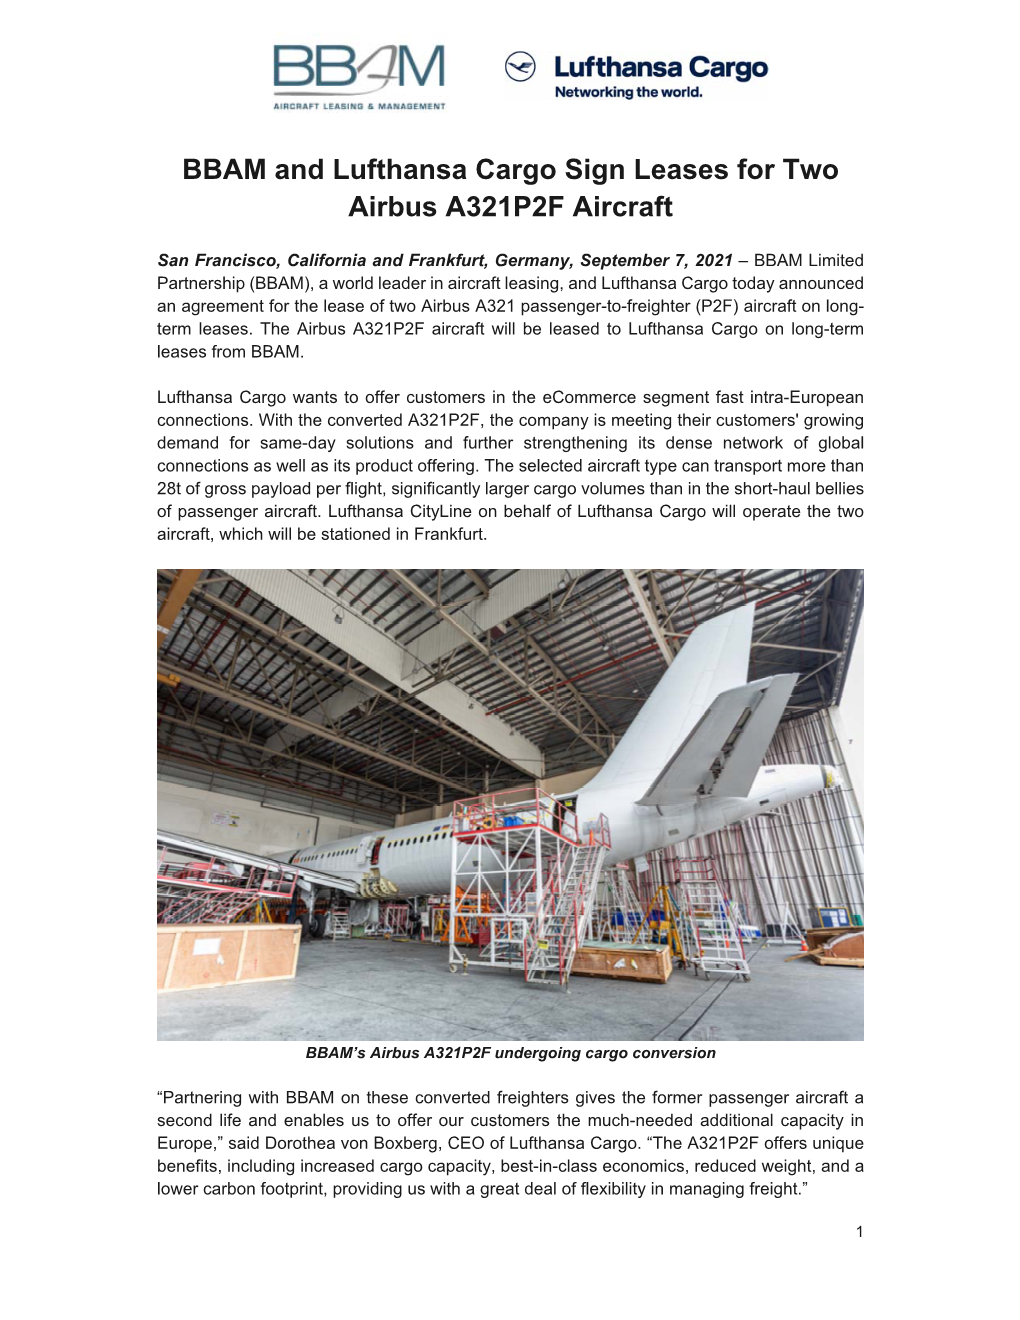 BBAM and Lufthansa Cargo Sign Leases for Two Airbus A321P2F Aircraft